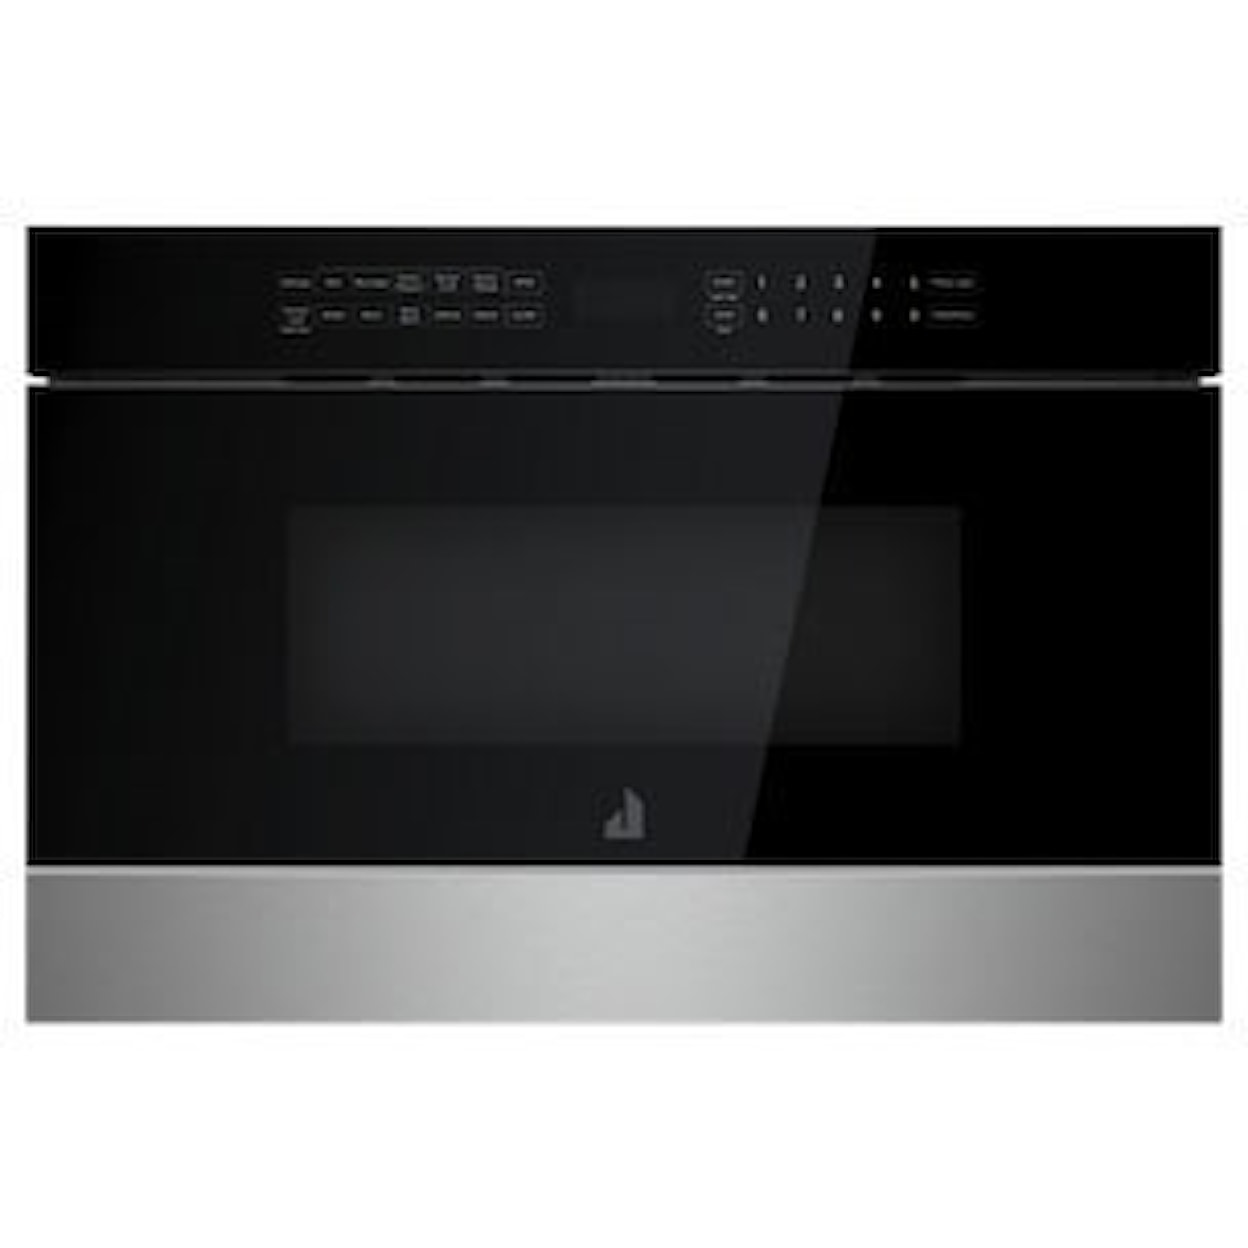 Jenn-Air Microwaves 30" Under Counter Microwave Oven